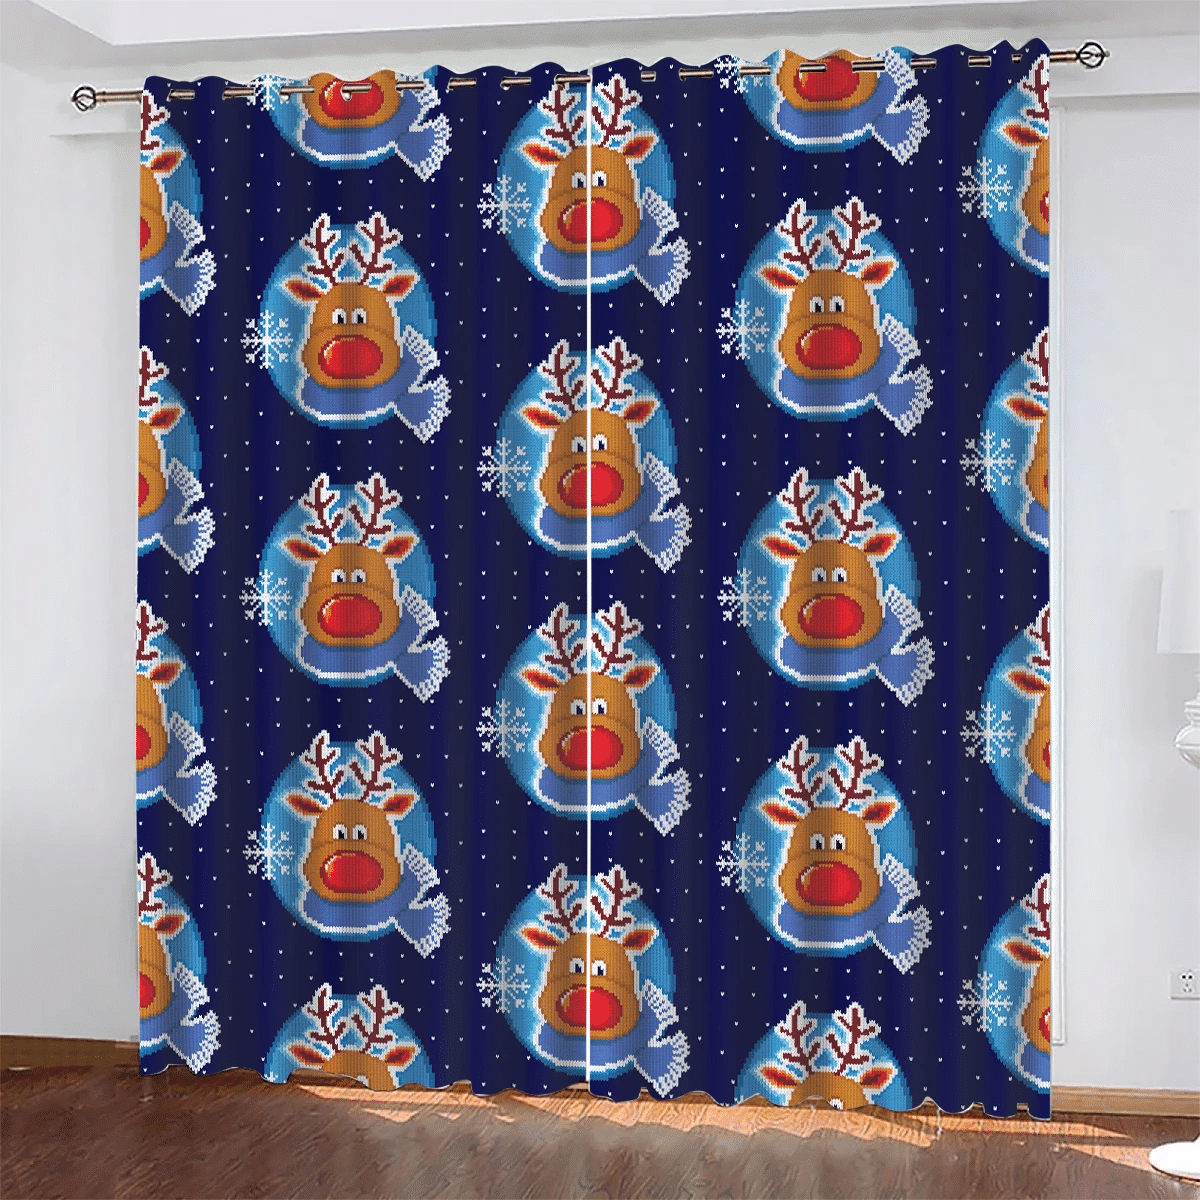 Xmas Deer Of Santa With Red Nose In Blue Scarf Window Curtains Door Curtains Home Decor